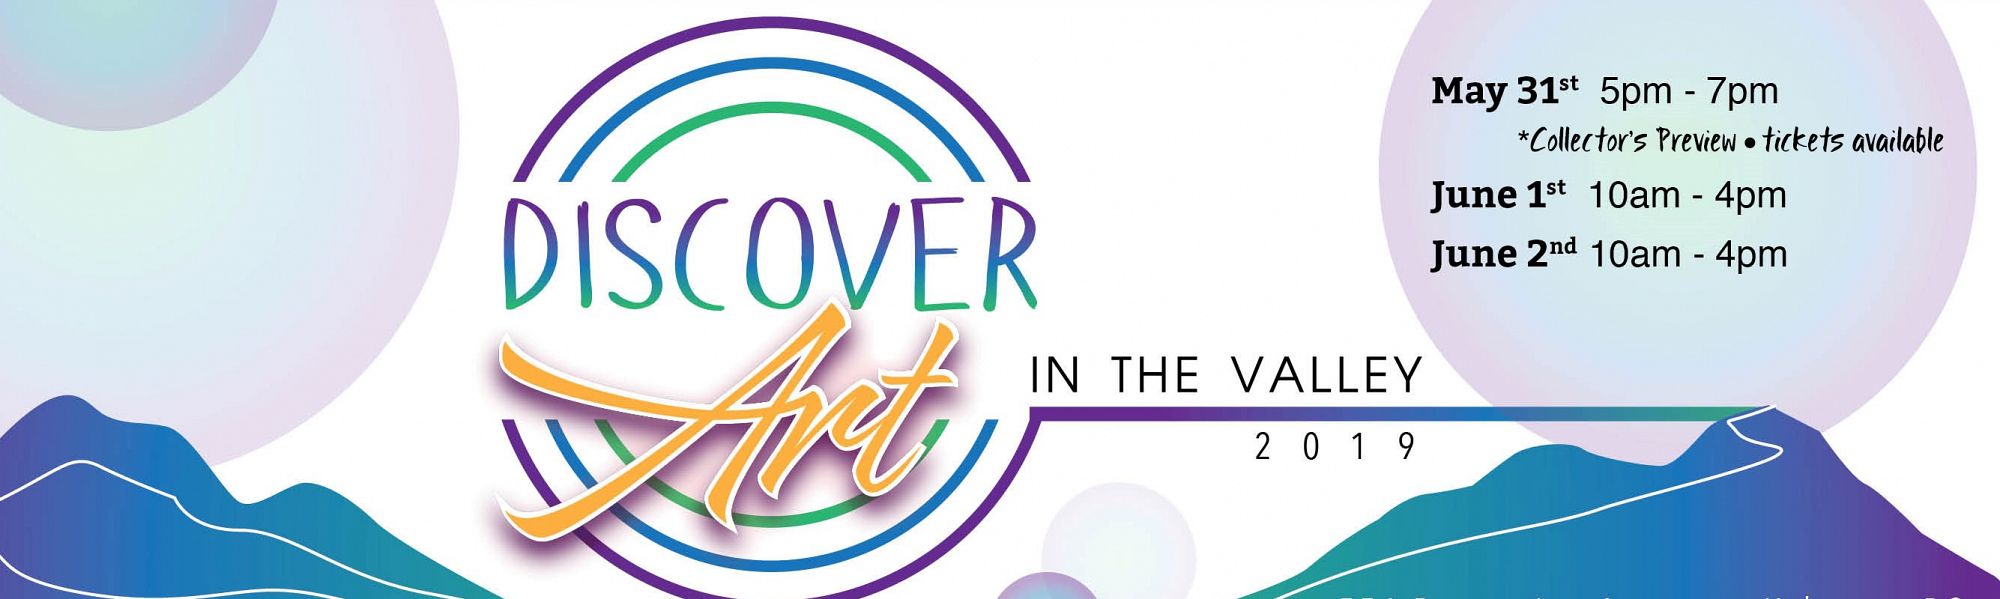 Discover Art in the Valley '19